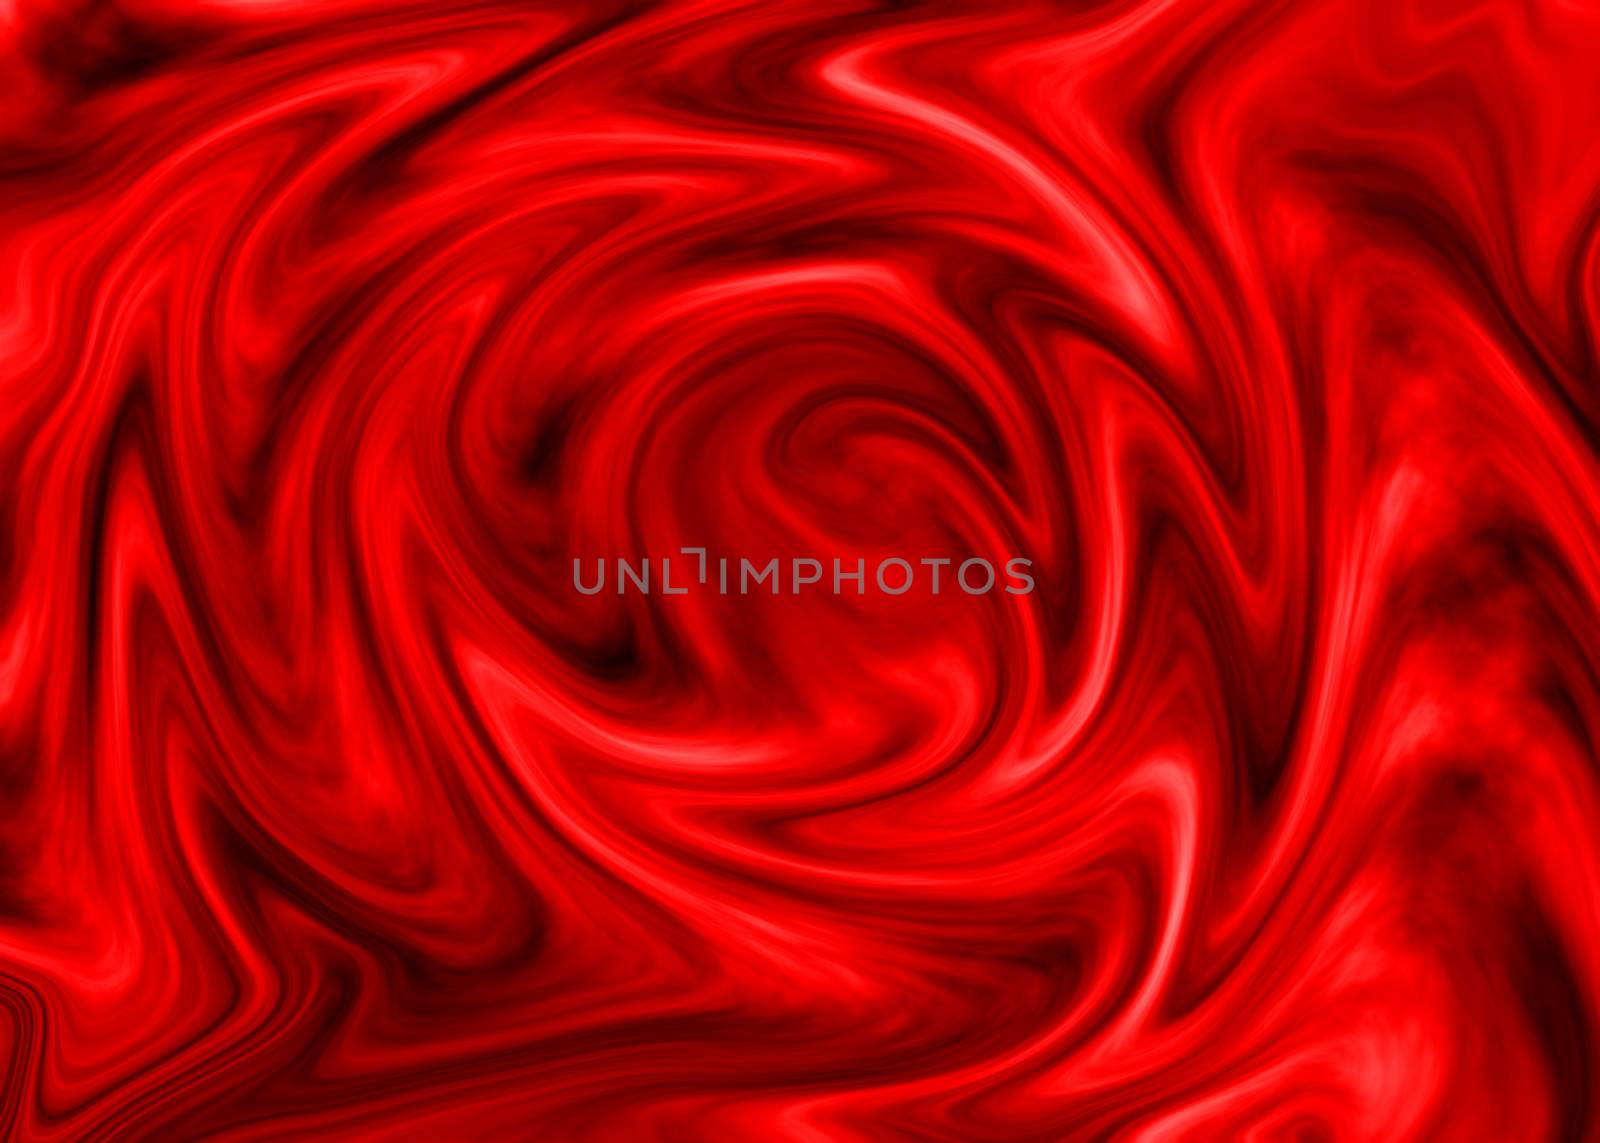 Red abstract background. Vortex in the middle of the image